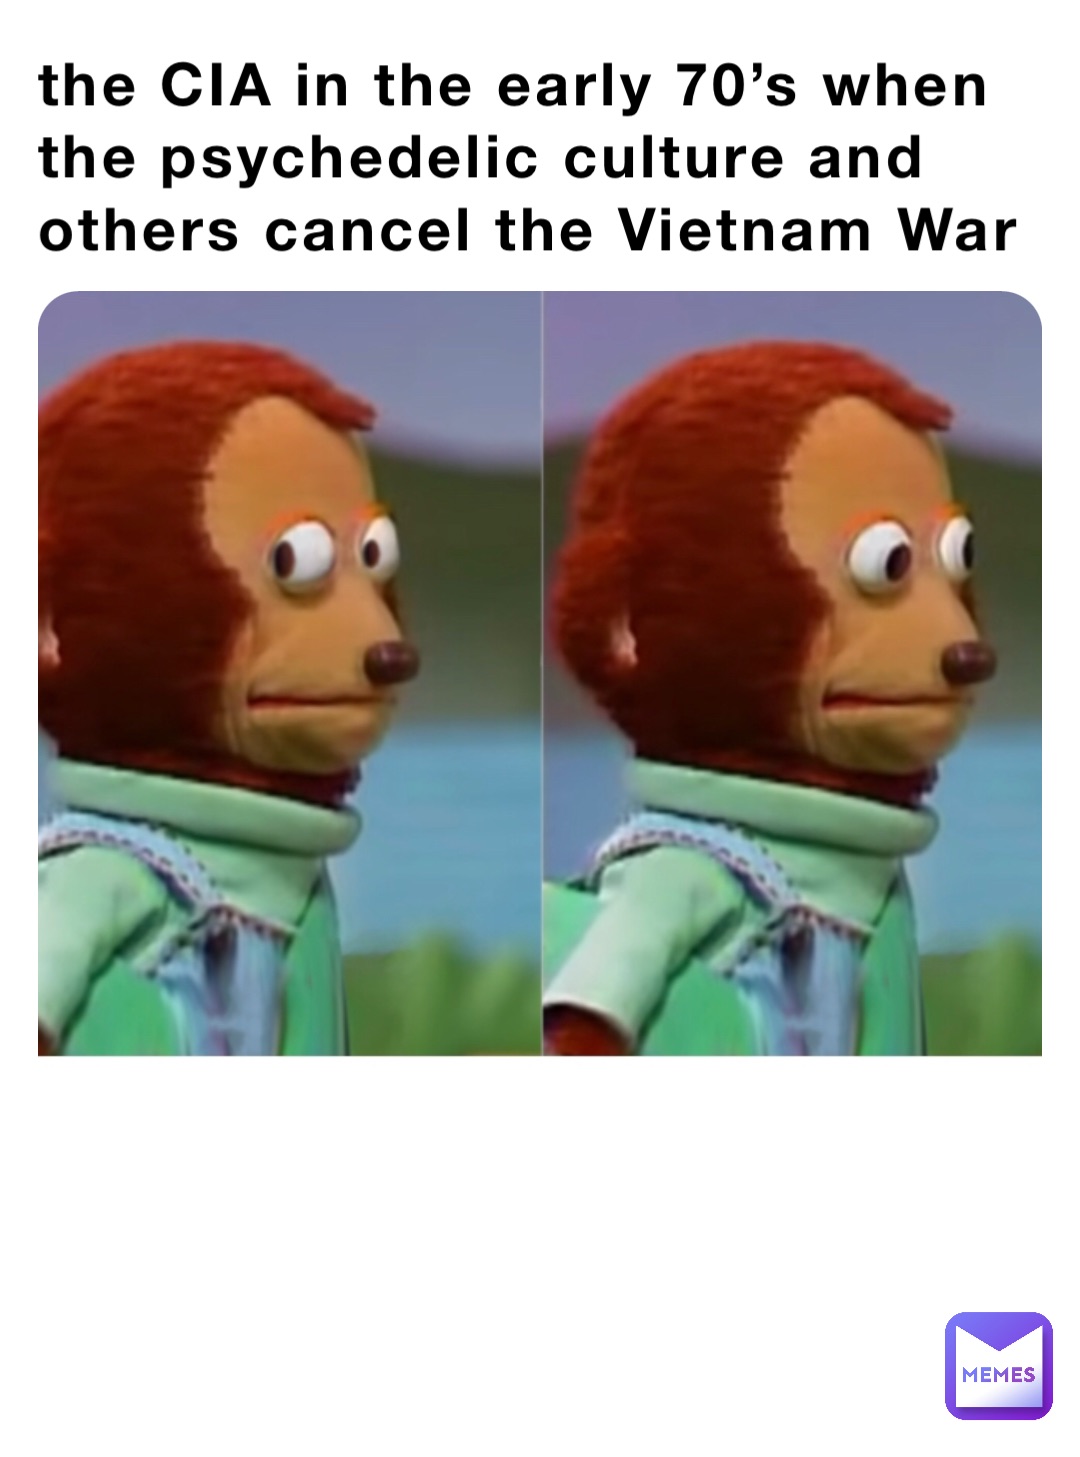 the CIA in the early 70’s when the psychedelic culture and others cancel the Vietnam War